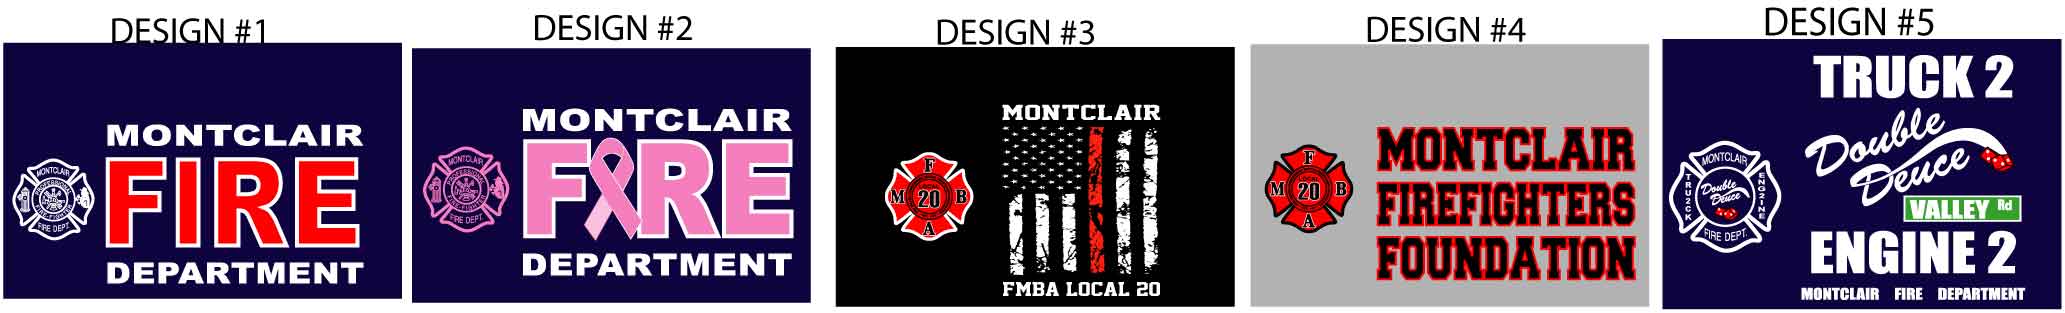 images/Montclair Fire Department Group.gif